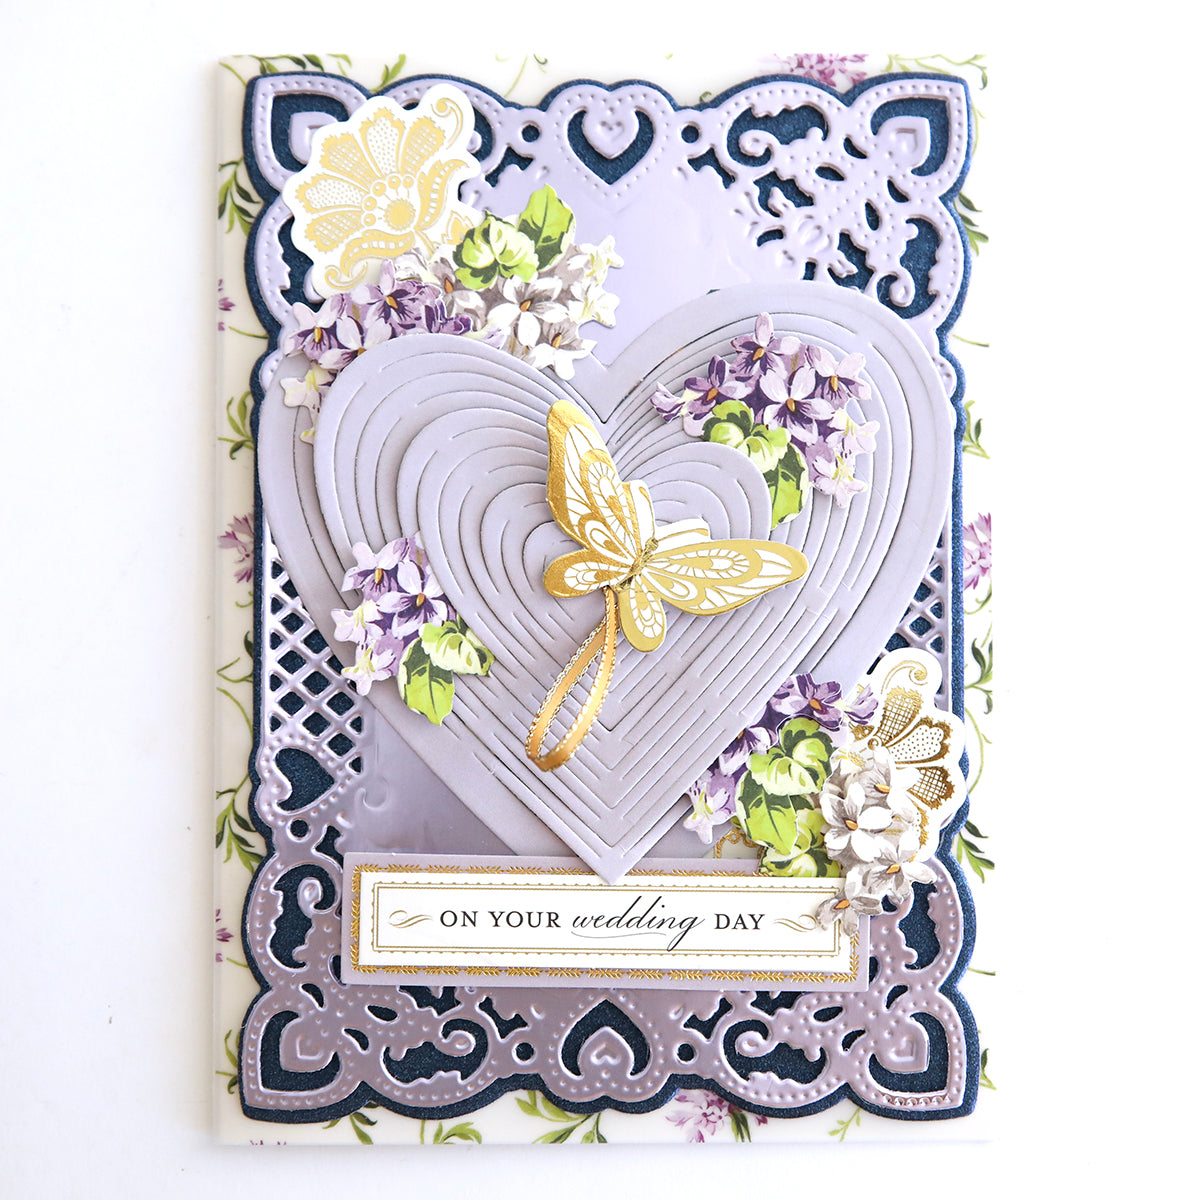 A Japanese-inspired wedding card featuring Heart Kirigami Dies adorned with delicate flowers.